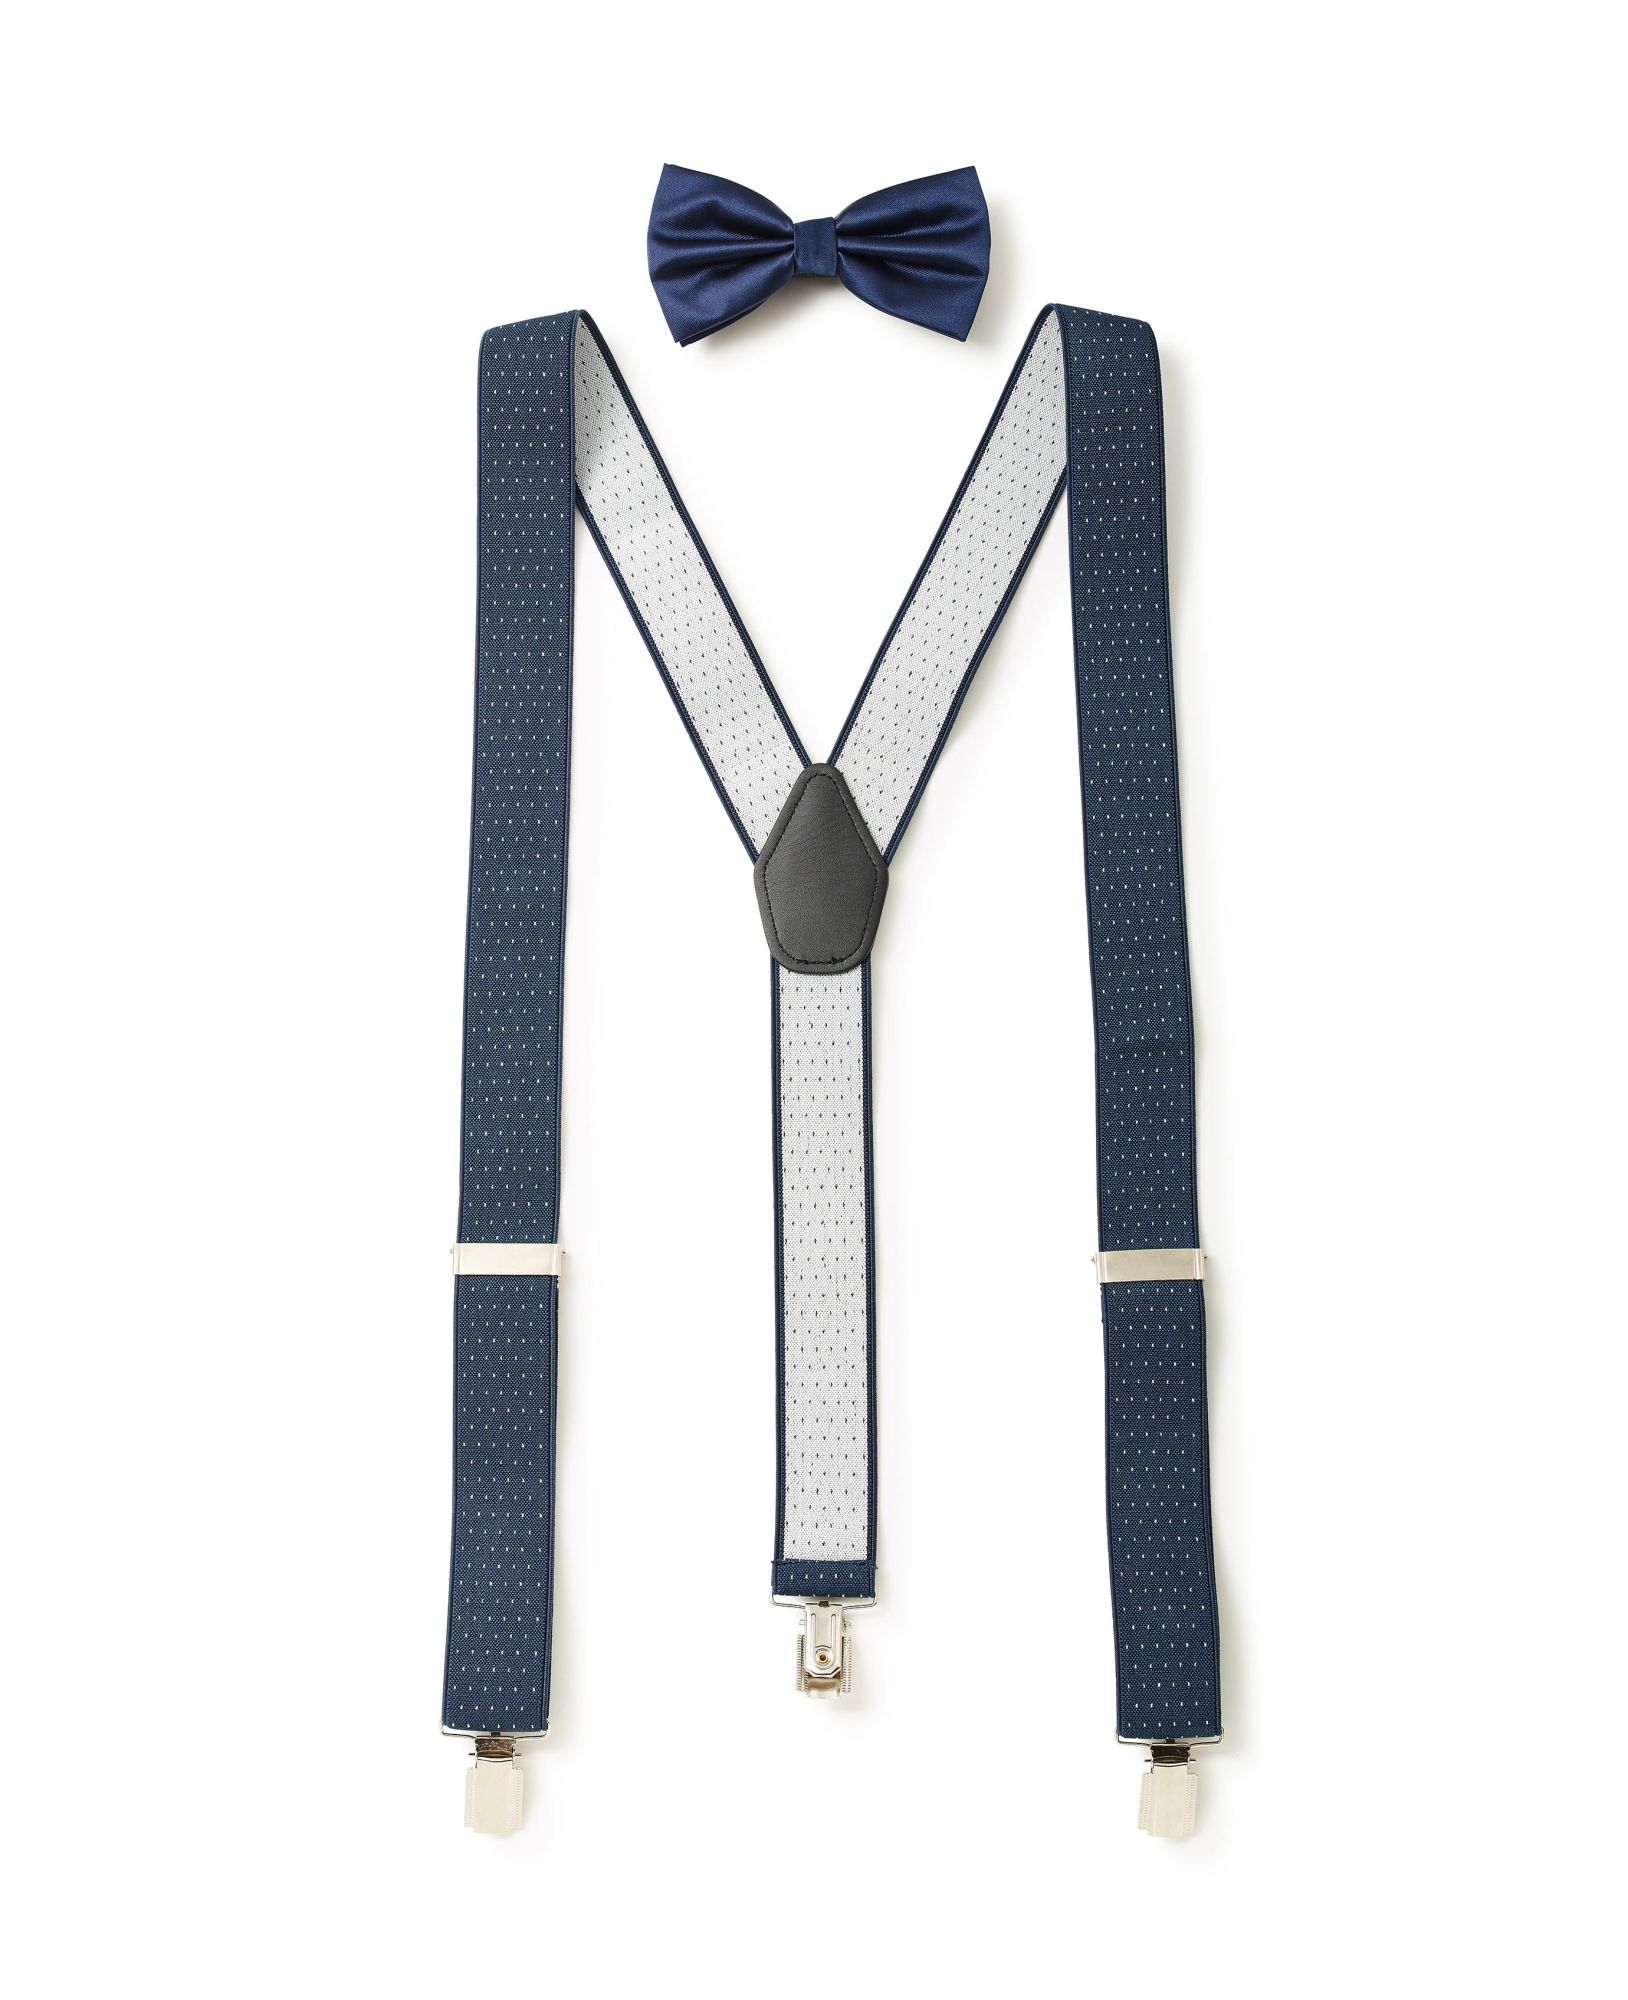 Navy Spotted Braces & Bow Tie Set